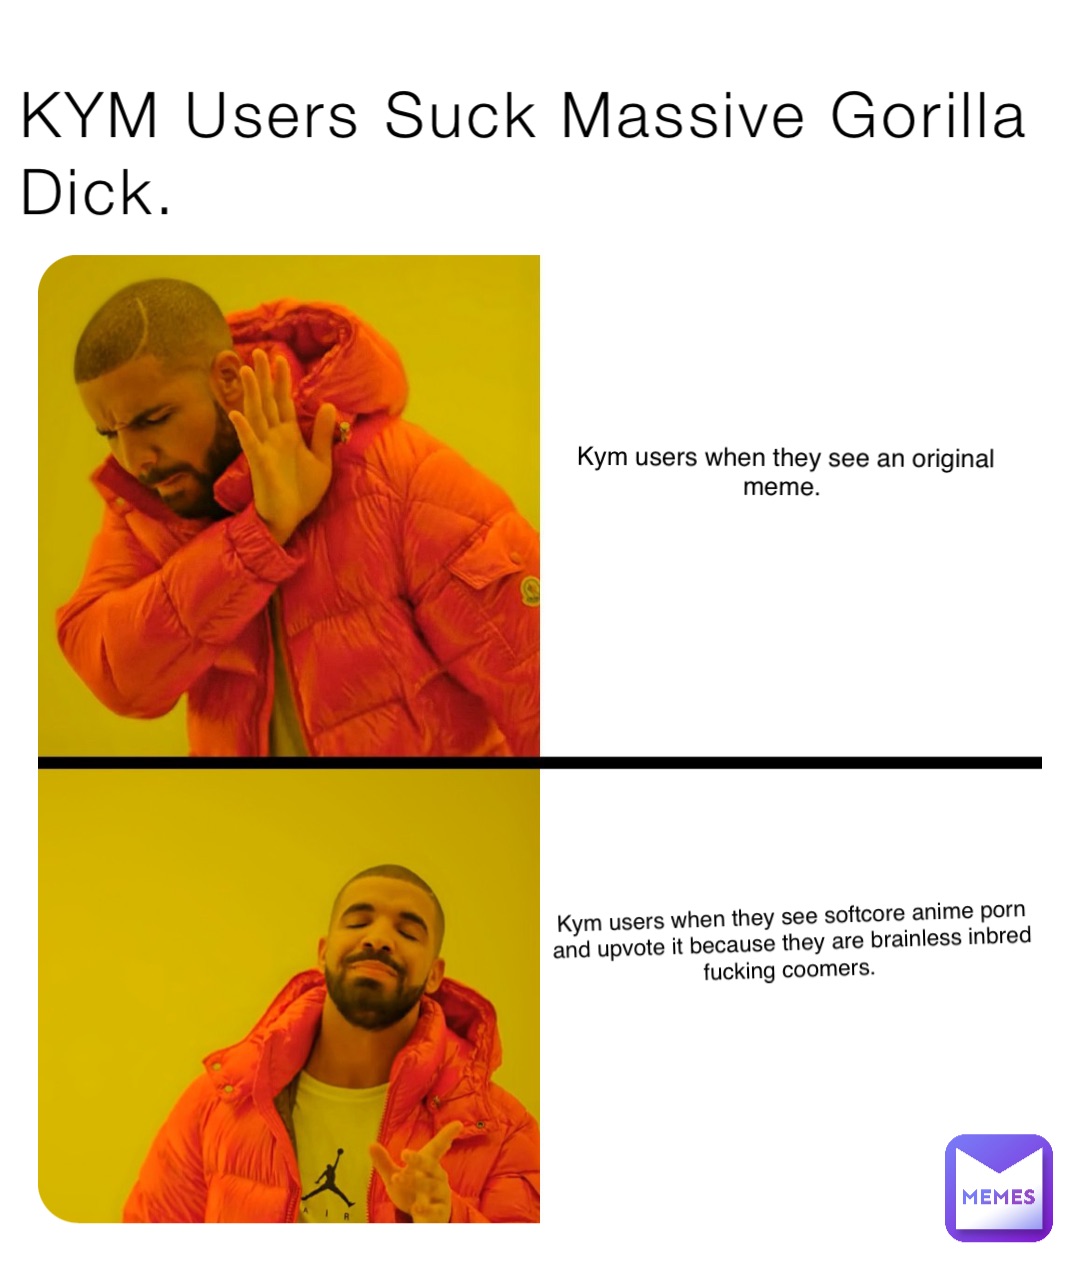 KYM Users Suck Massive Gorilla Dick. Kym users when they see an original meme. Kym users when they see softcore anime porn and upvote it because they are brainless inbred fucking coomers.